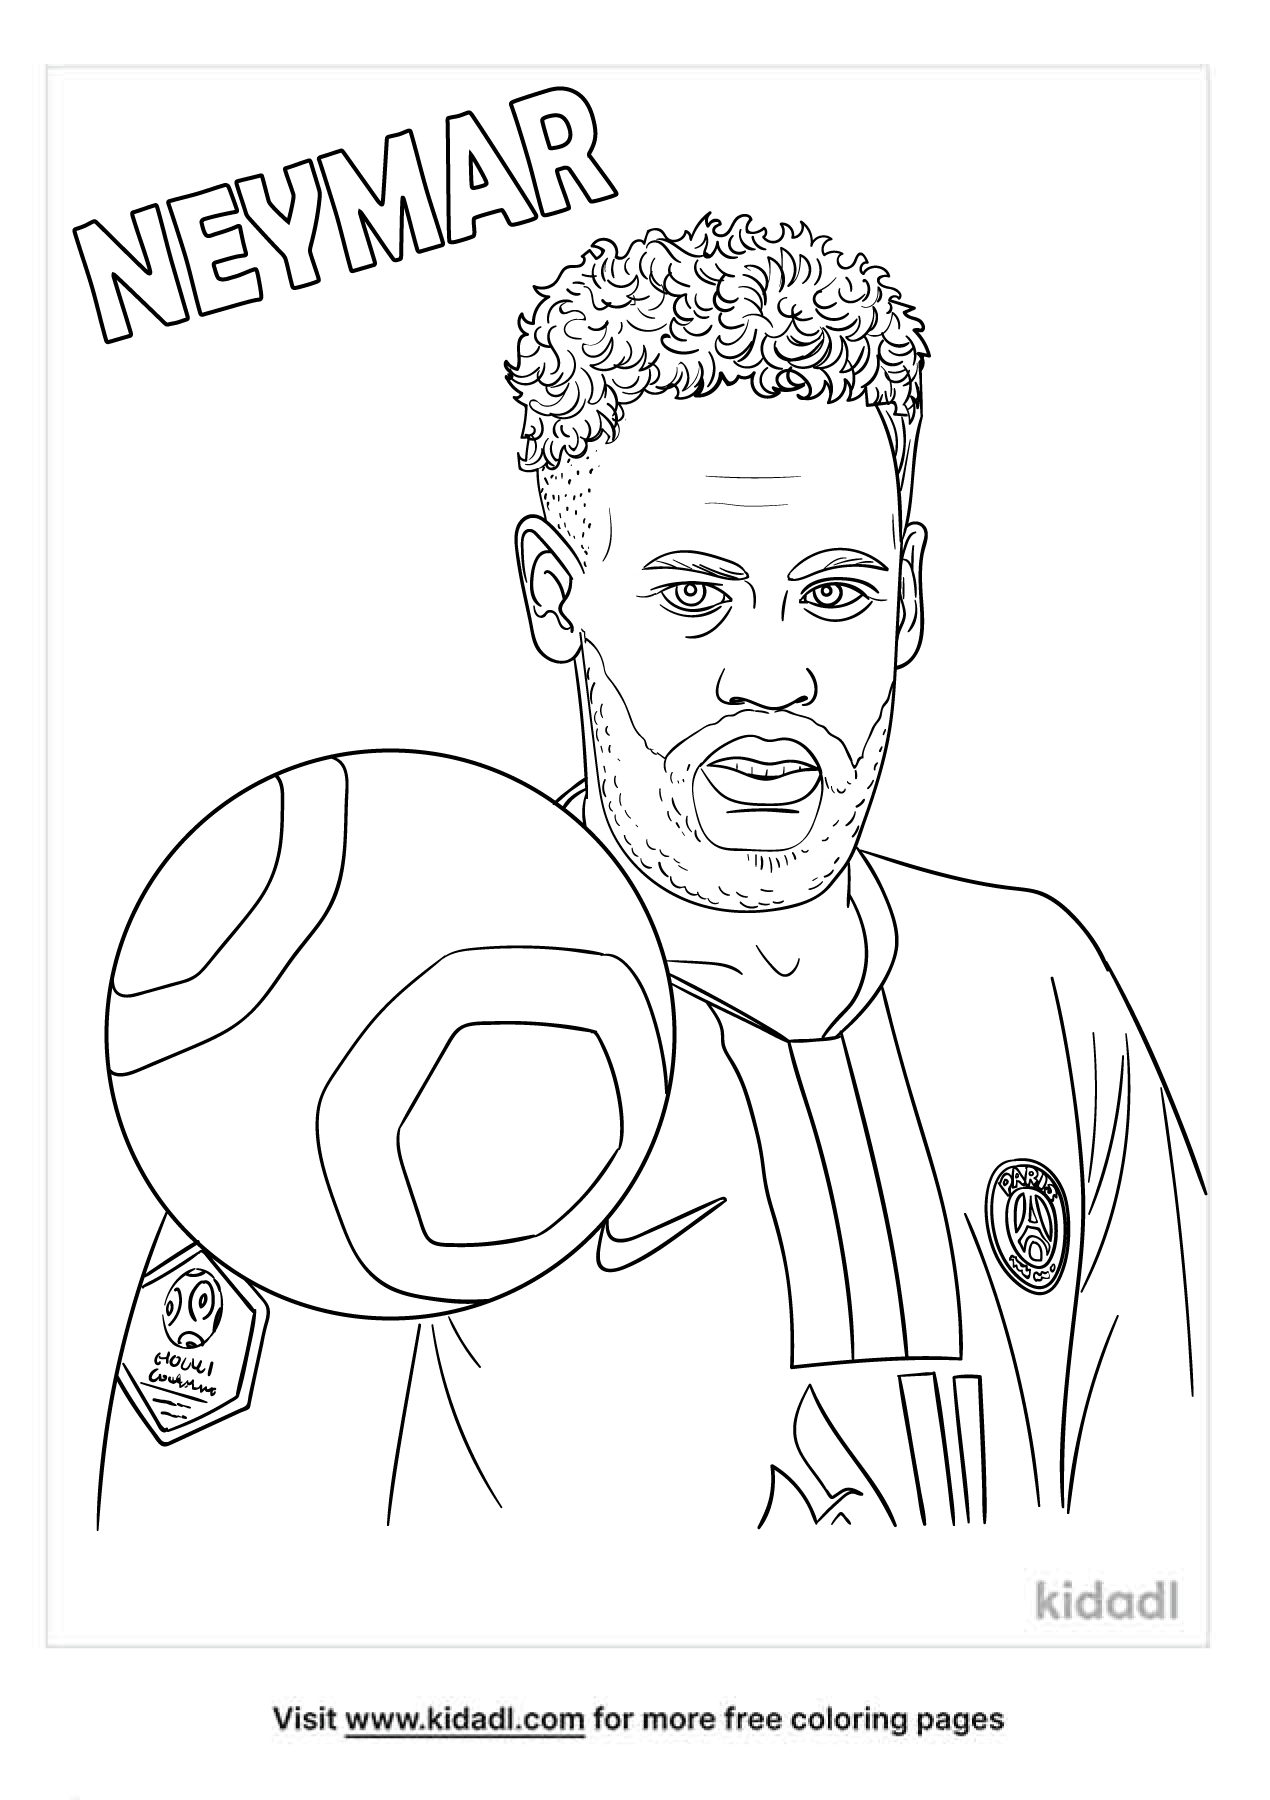 Neymar Coloring Pages | Free People Coloring Pages | Kidadl